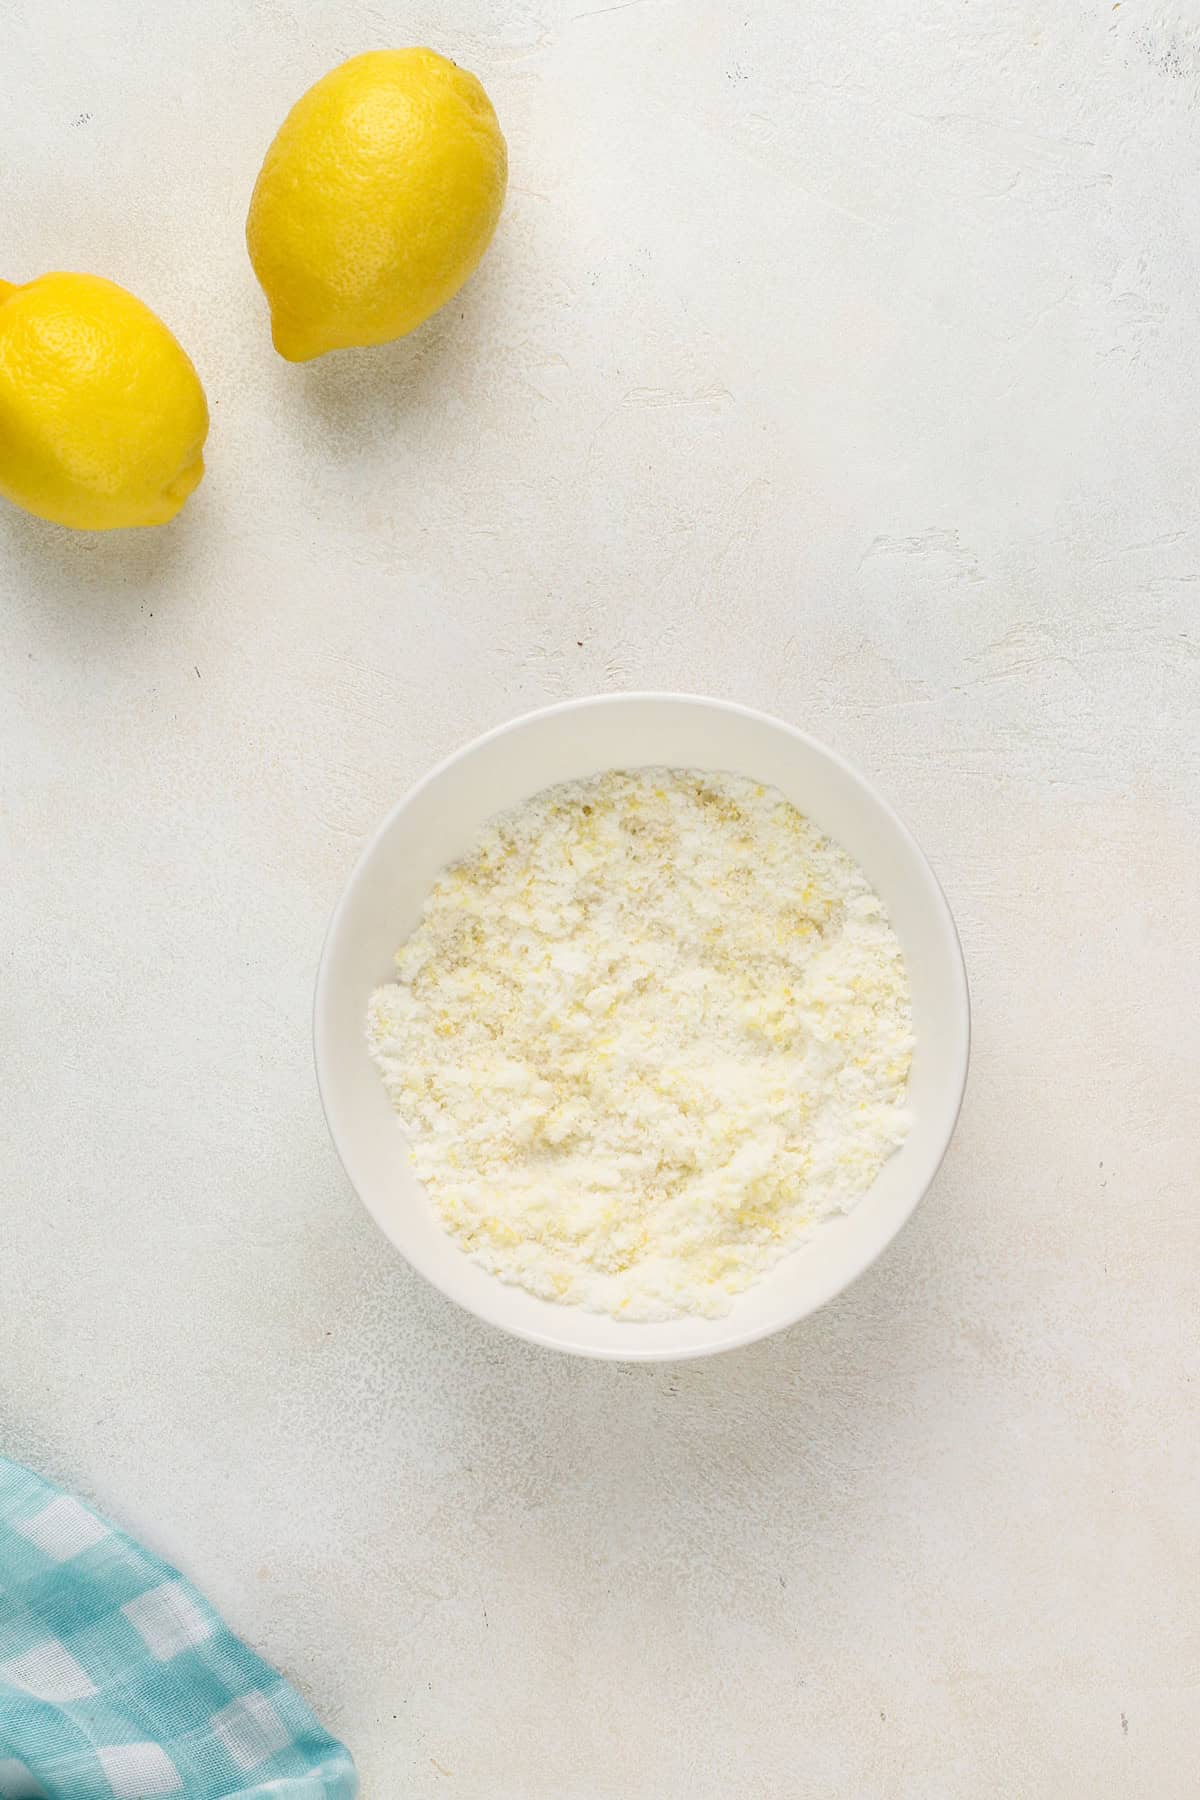 Granulated sugar mixed with lemon zest in a white bowl.